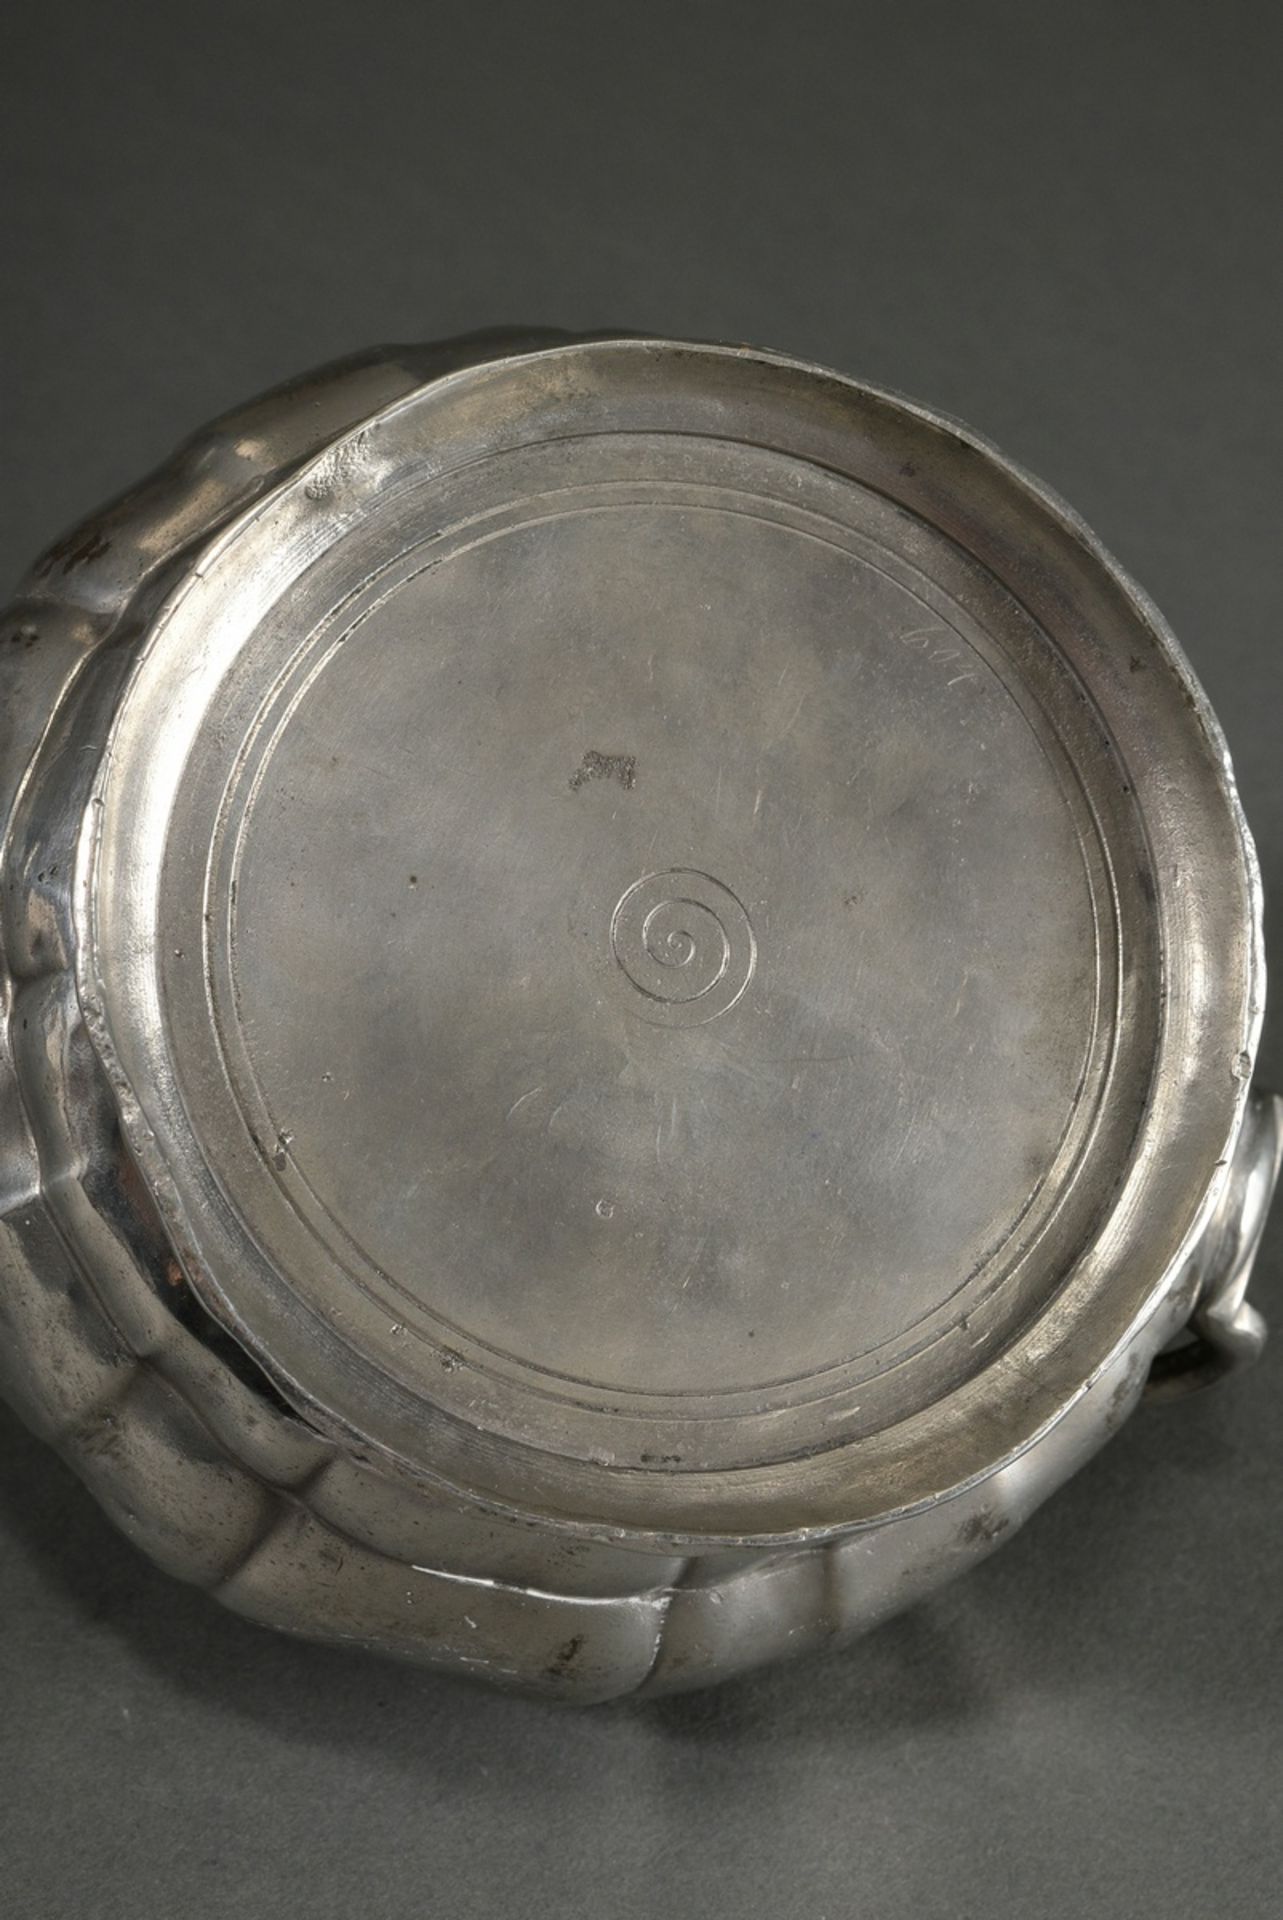 Pewter lidded bowl with straight lines and side handles, monogram ‘AF’ in foliage wreath, town mark - Image 5 of 5